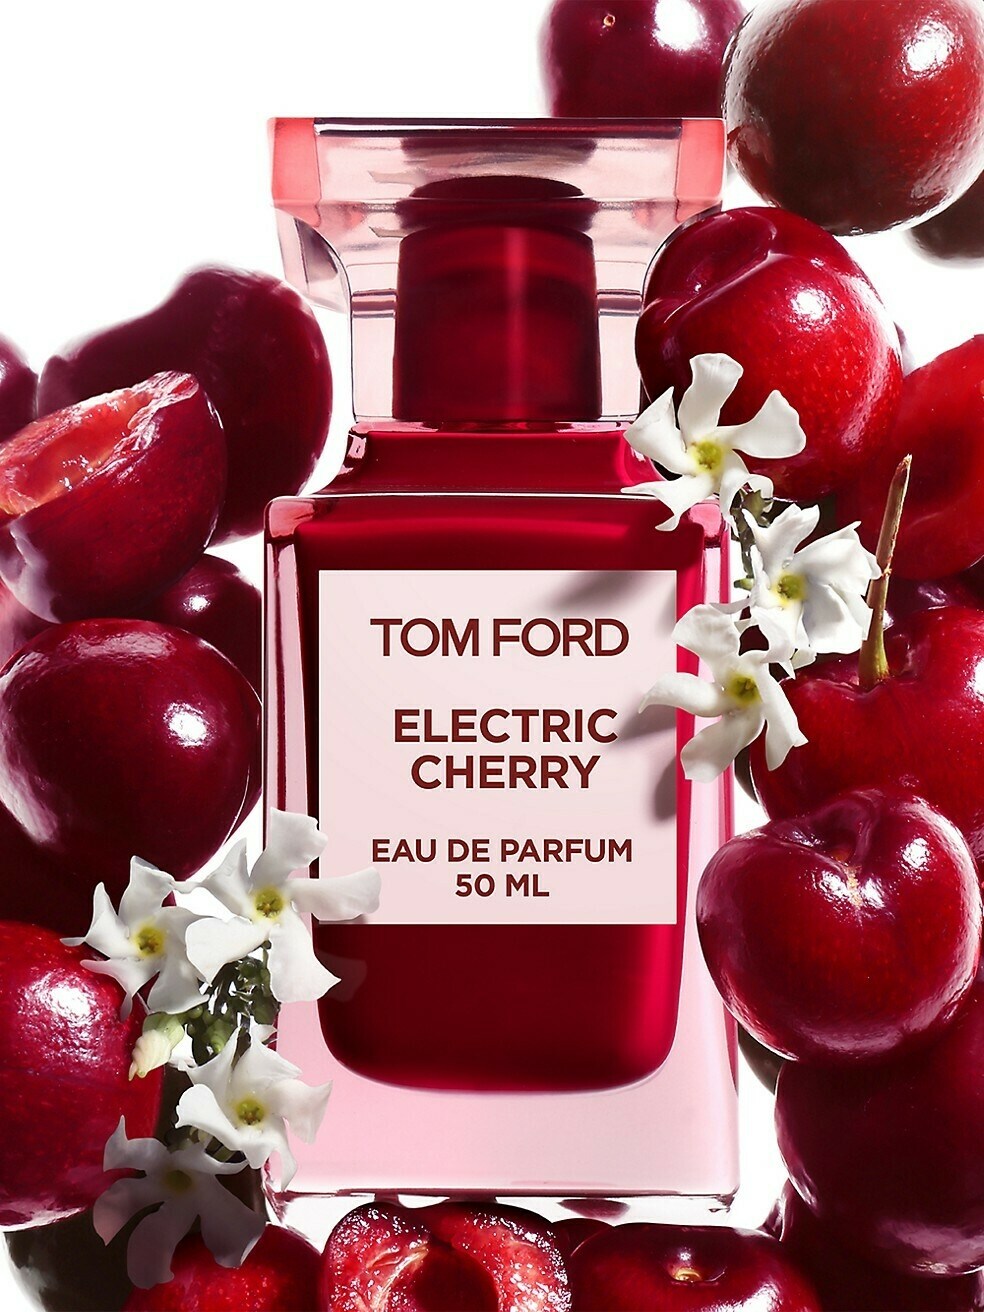 Electric Cherry by Tom Ford » Reviews & Perfume Facts